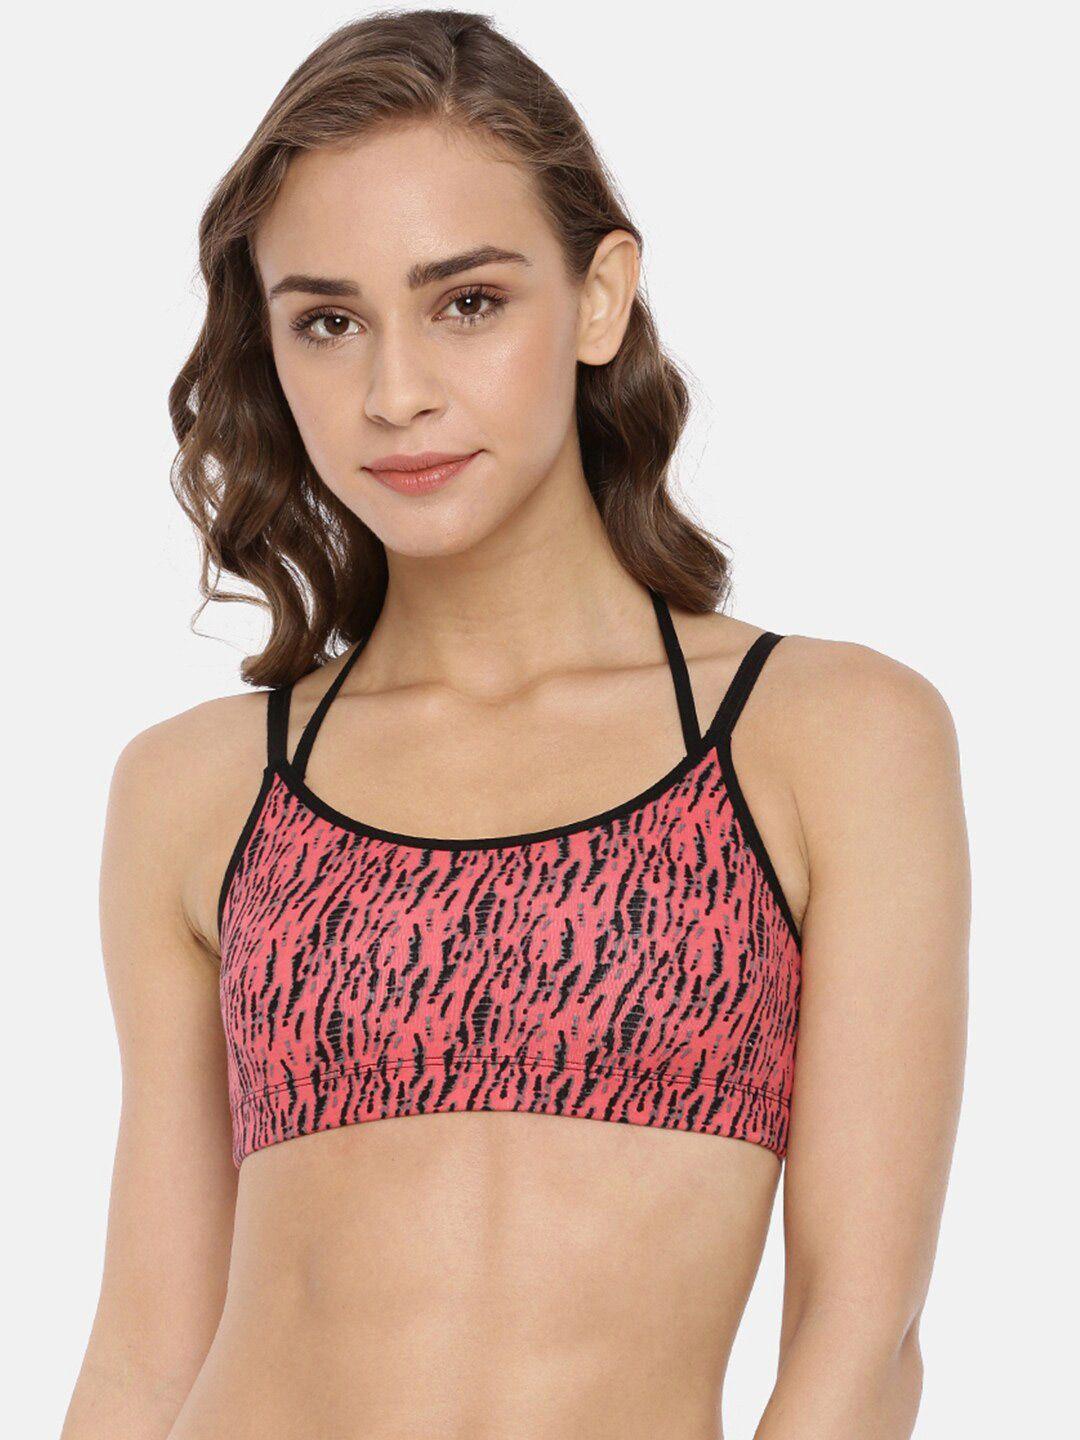 macrowoman w-series abstract printed full coverage beginners bra with all day comfort